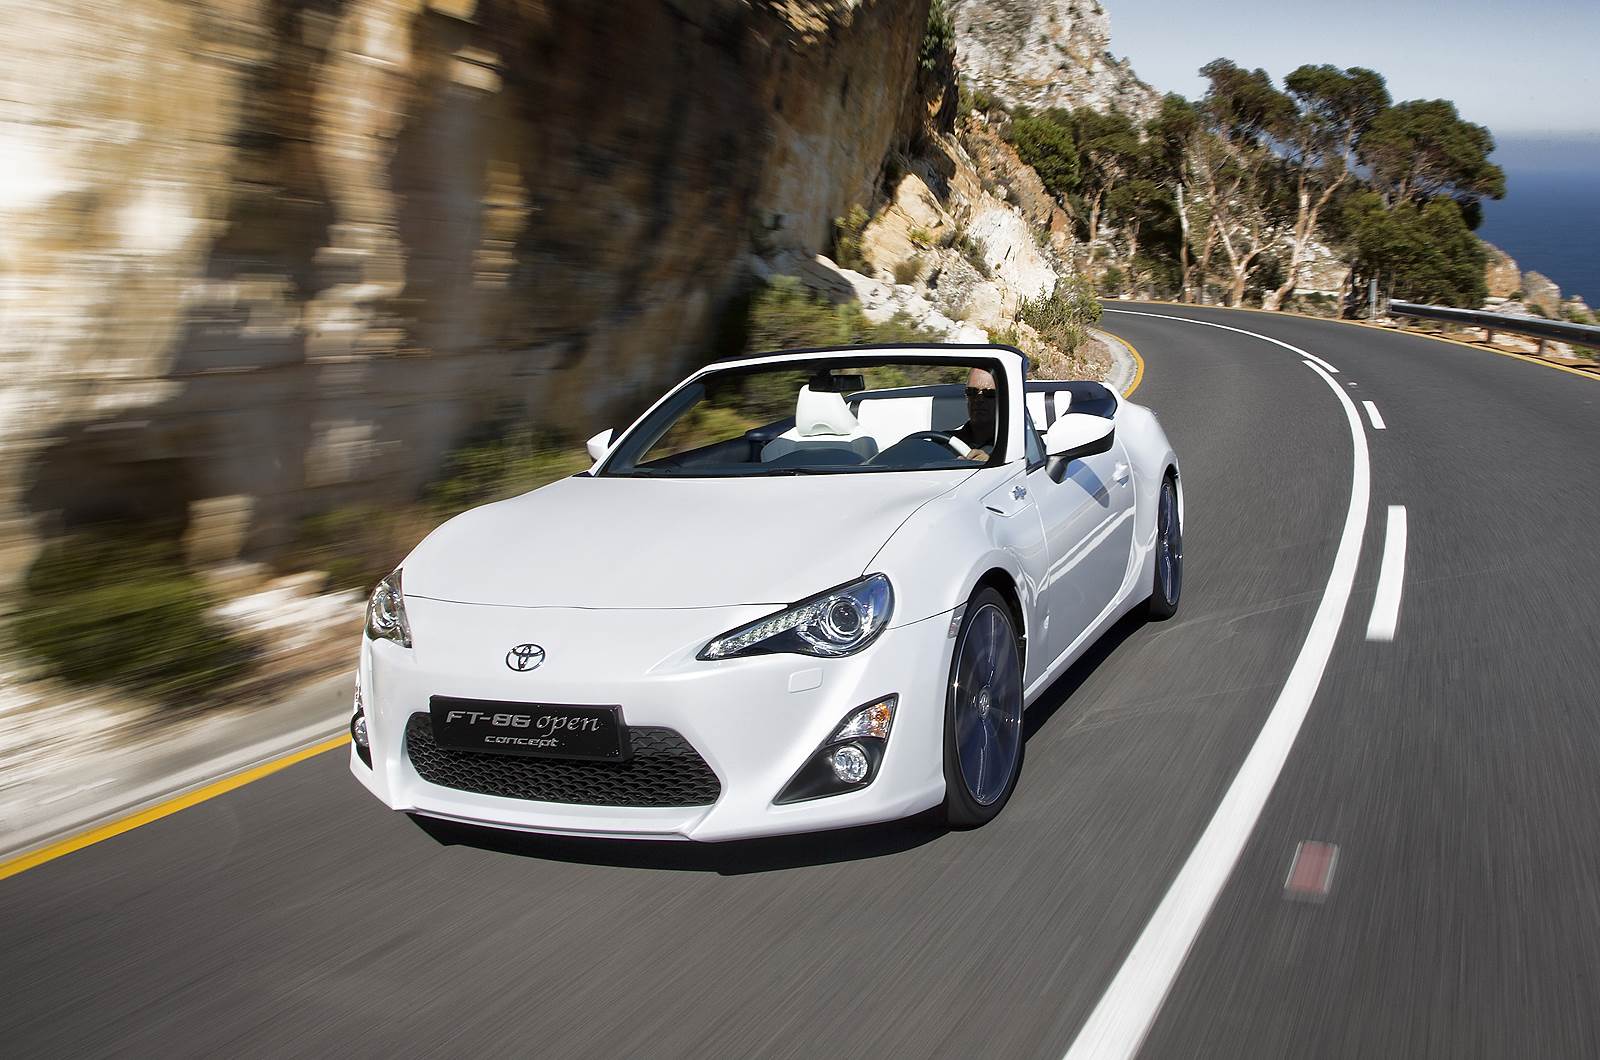 Toyota FT-86 Open concept photo gallery | Autocar India